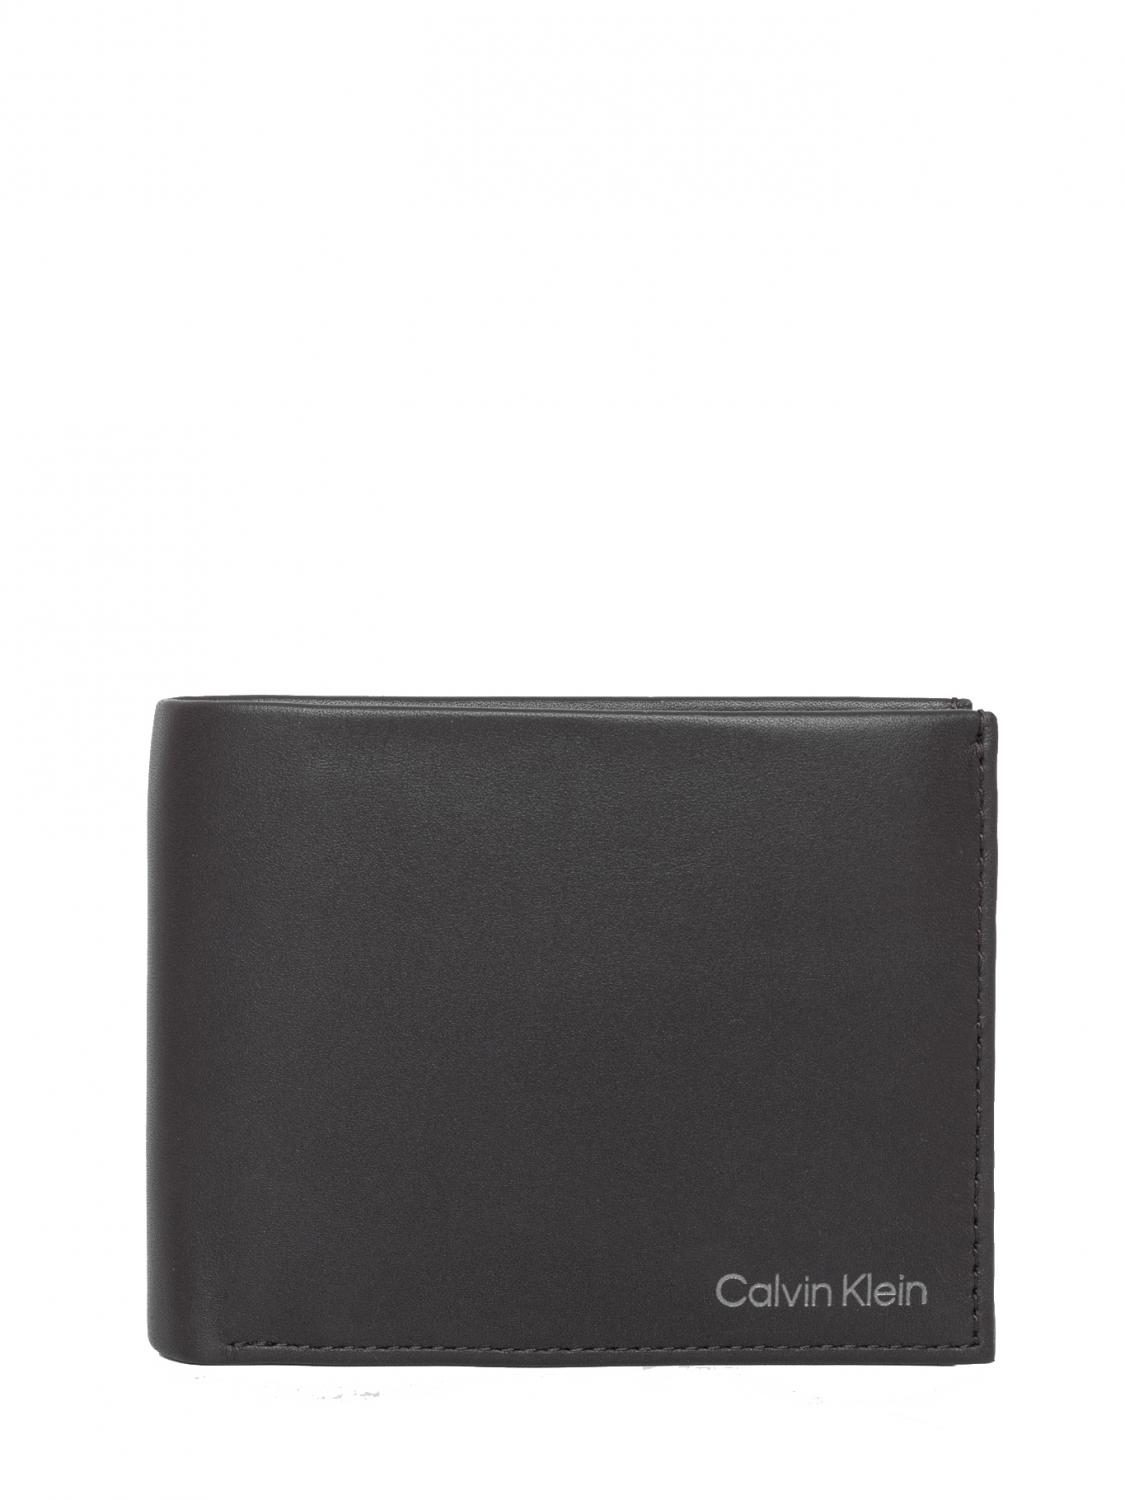 Calvin Klein Vital Leather Wallet Dark Brown - Buy At Outlet Prices!